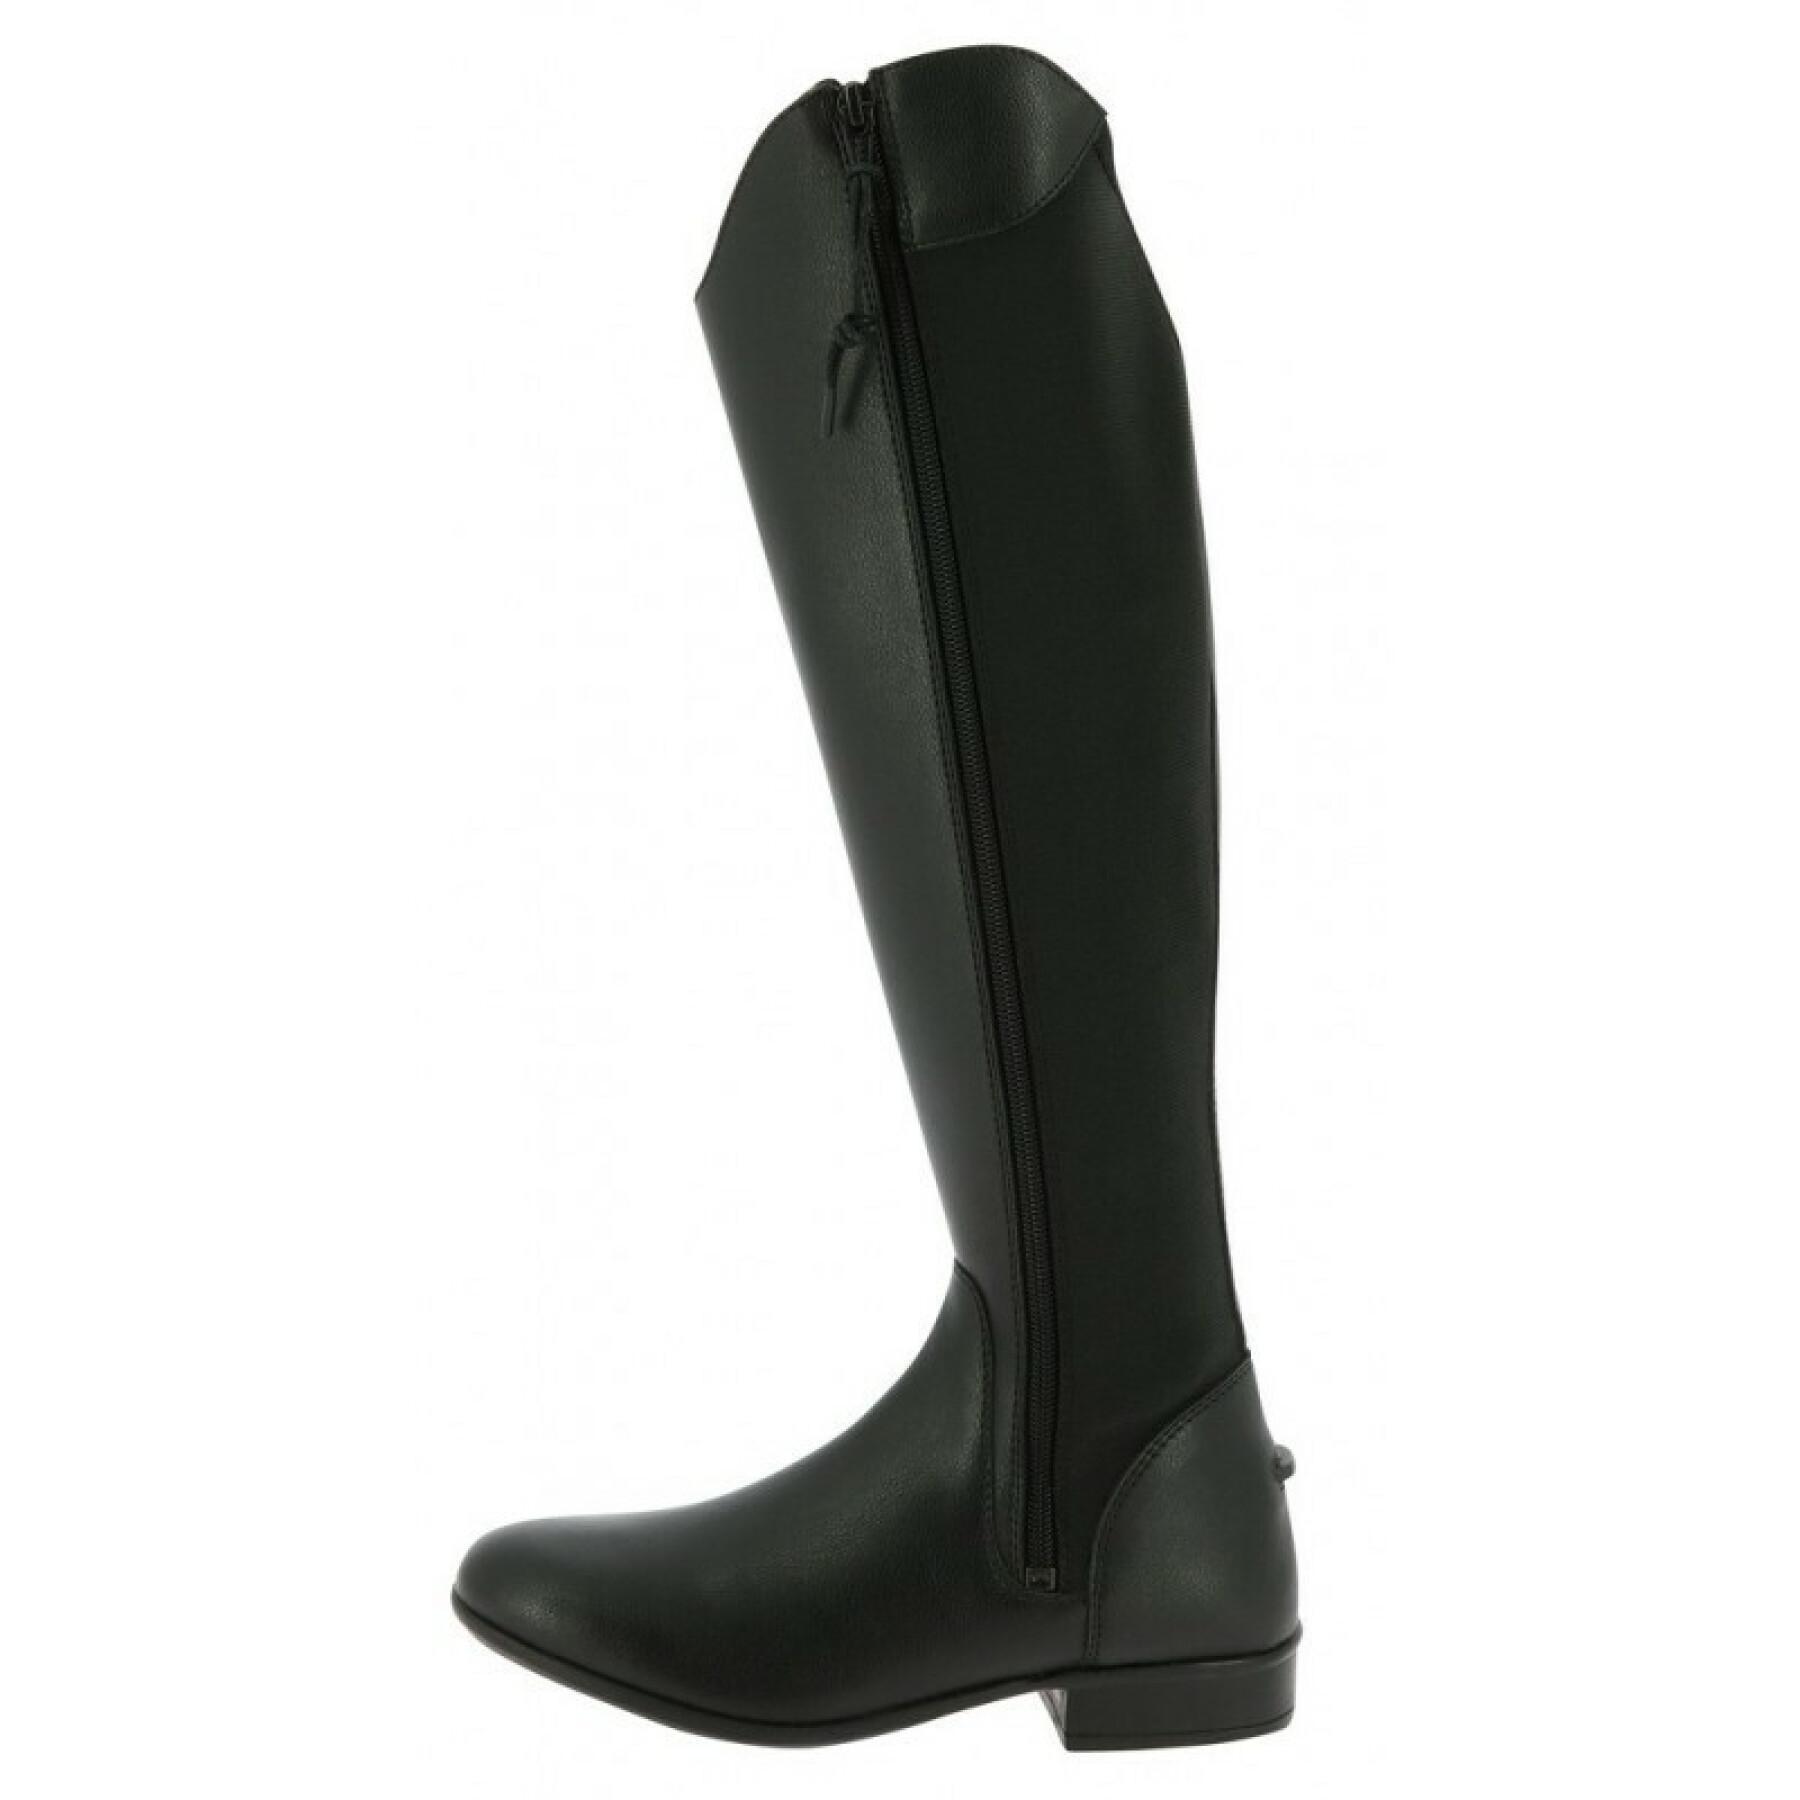 Women's synthetic riding boots Norton Easyfit